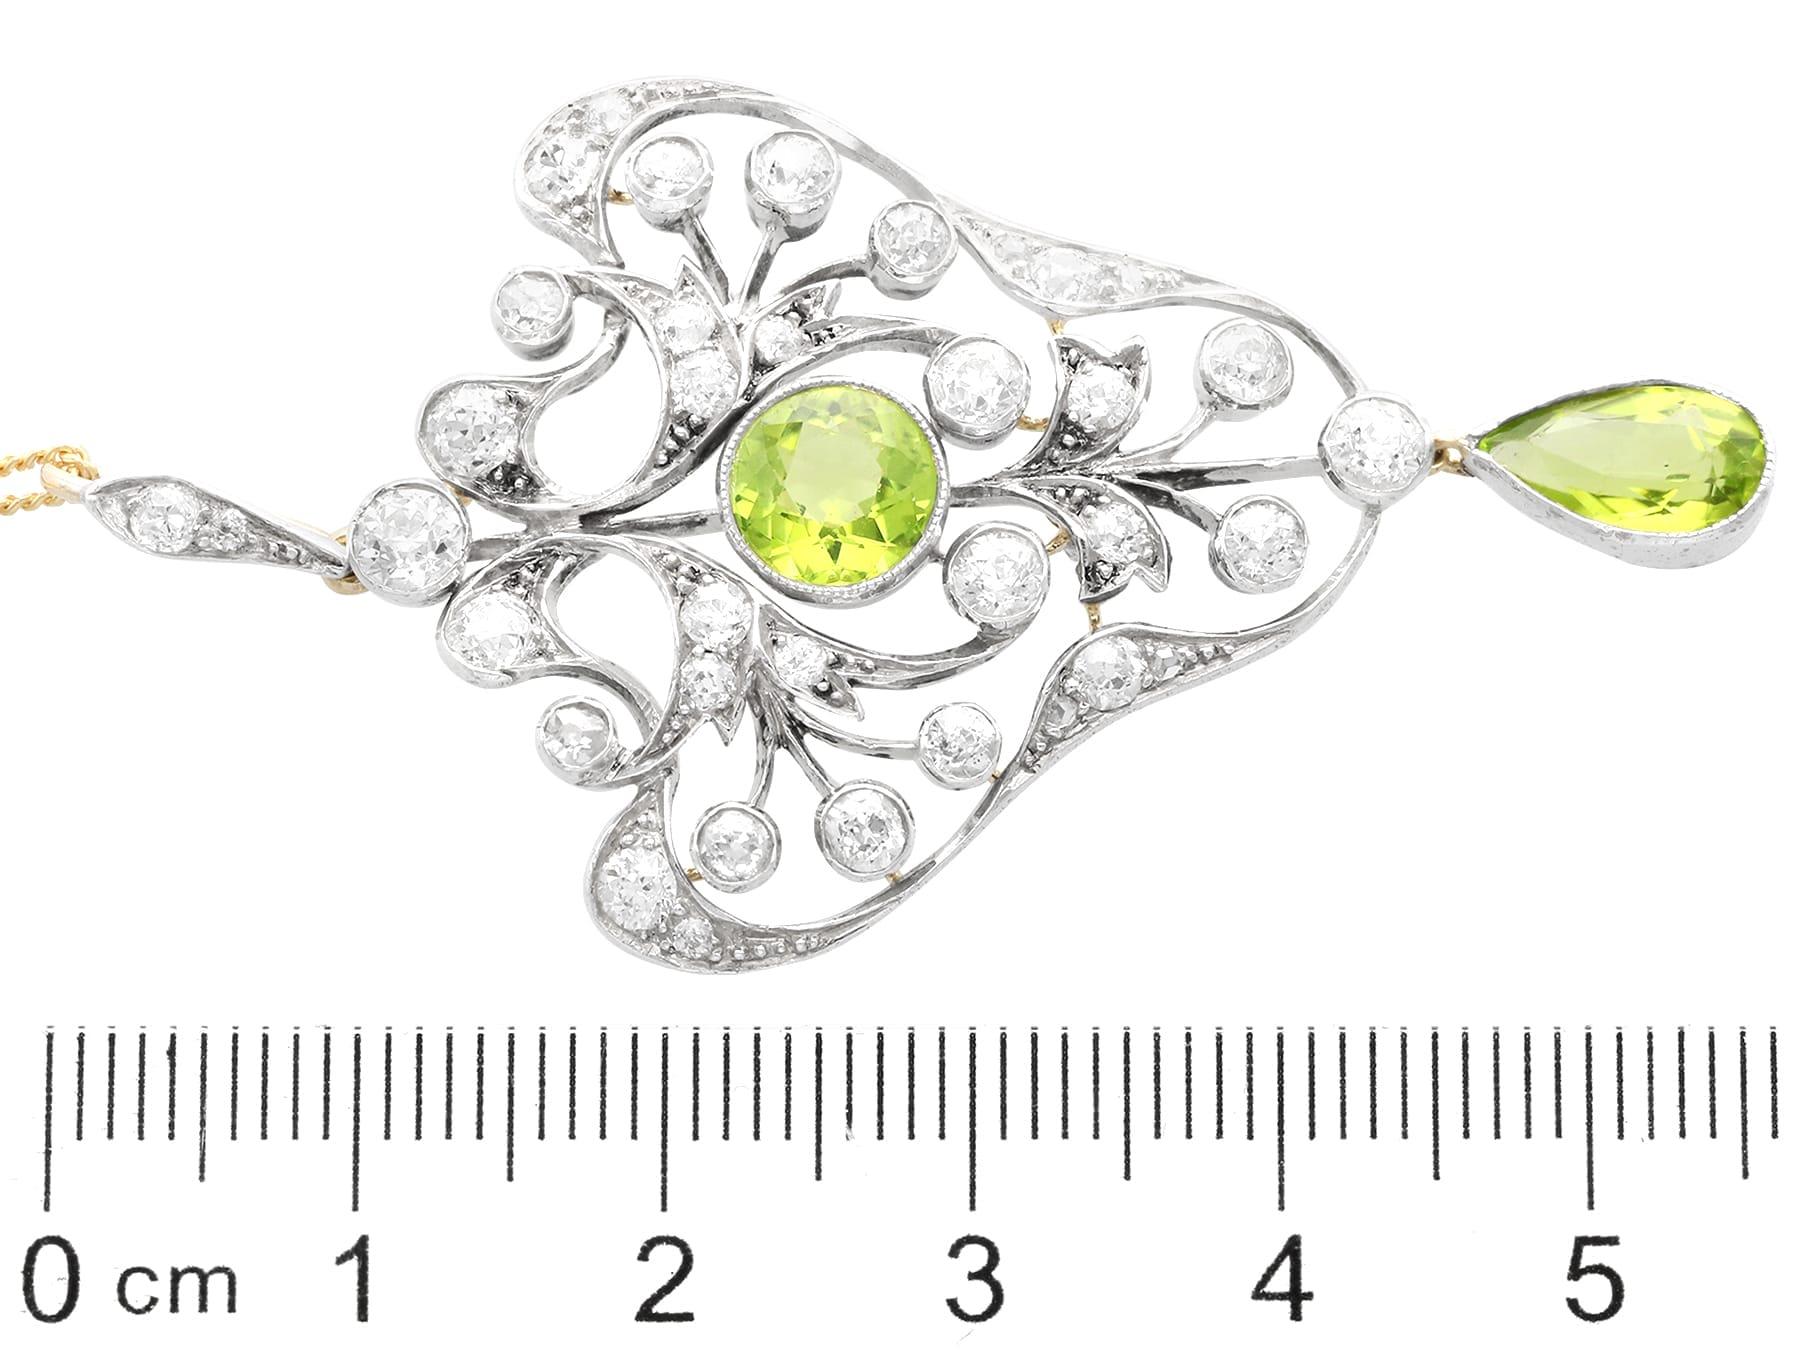 Antique 3.02Ct Peridot and 3.41Ct Diamond, 14k Yellow Gold Pendant / Brooch For Sale 2